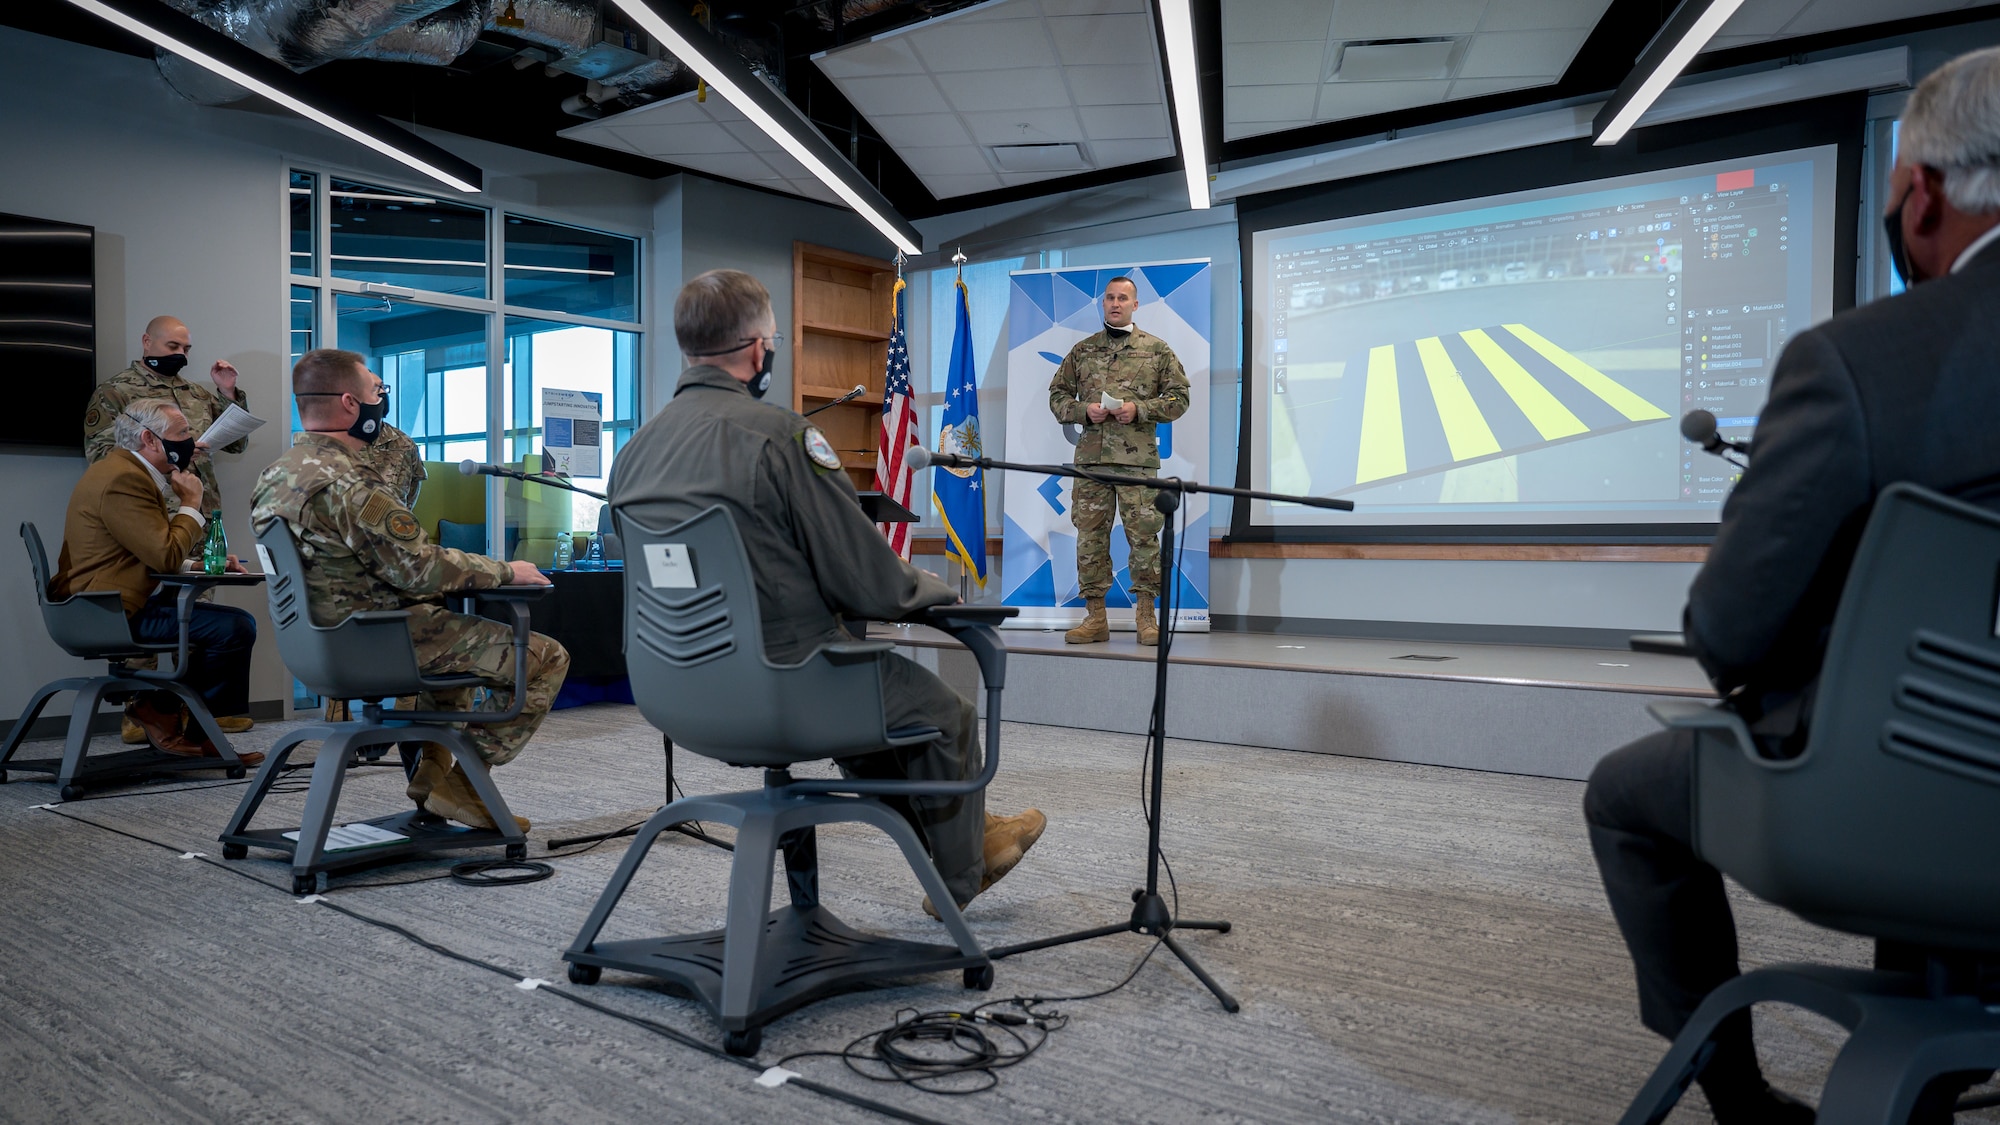 The two finalists from the S3 event progressed on to represent AFGSC and pitch their ideas at the 2021 Air Force Spark Tank competition. (U.S. Air Force photo by Staff Sgt. Philip Bryant)